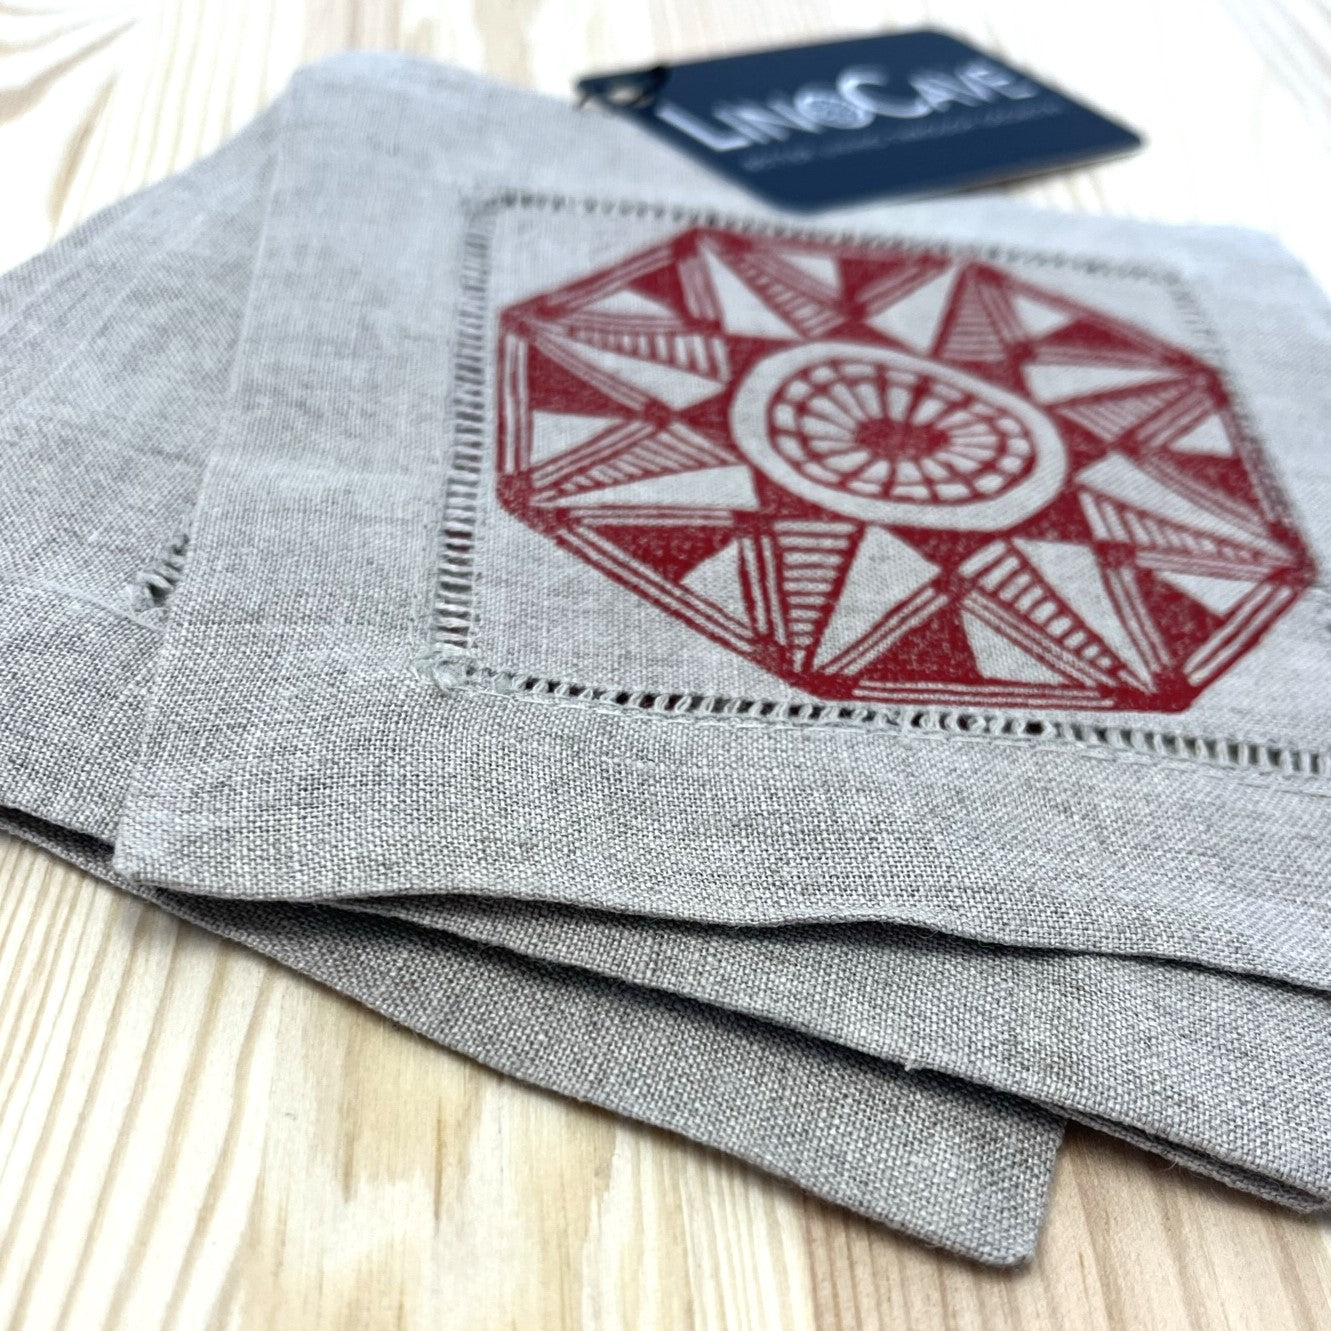 Hand-Printed Linen Coasters